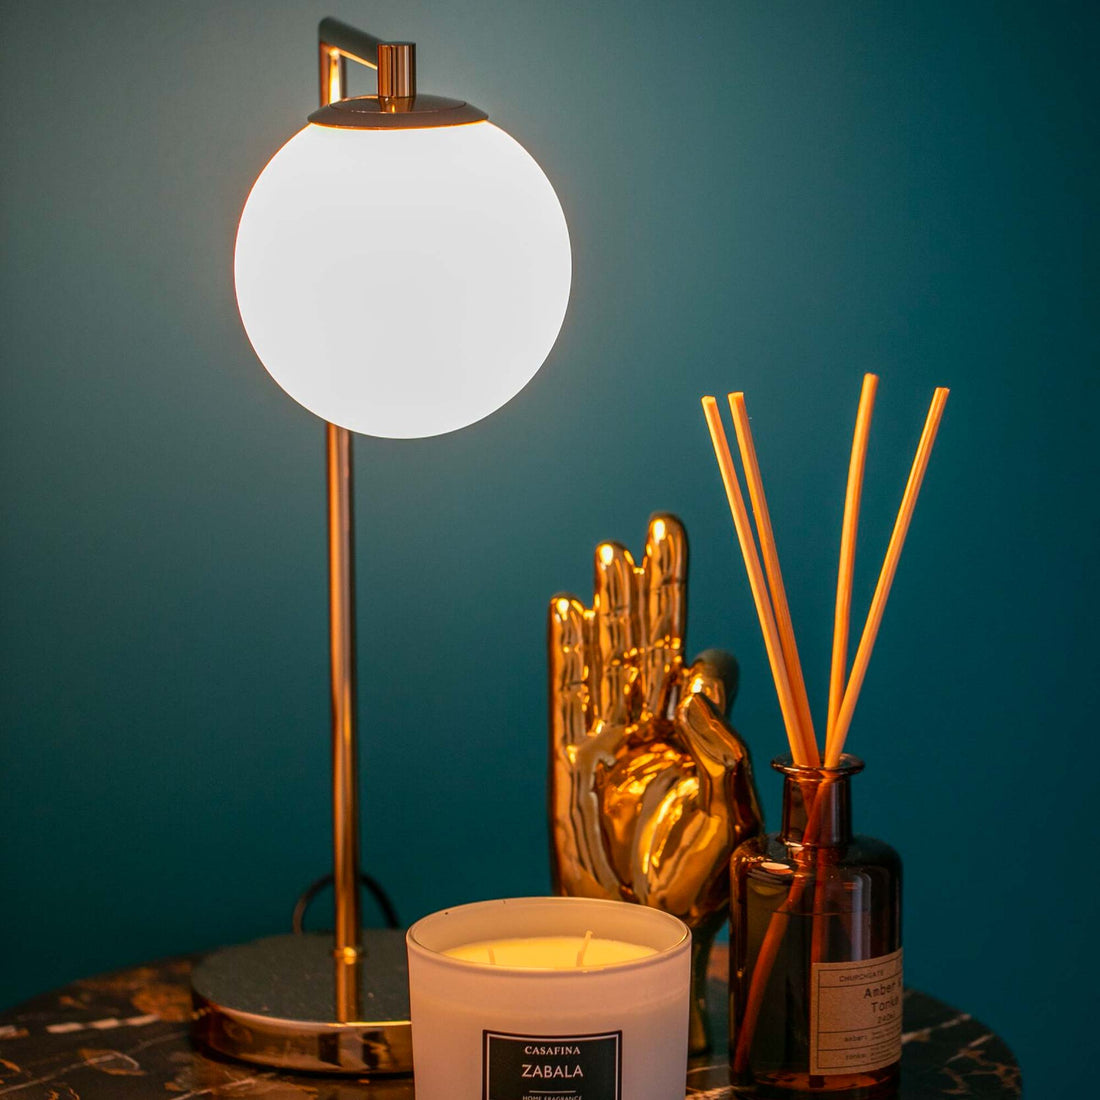  Table Lamps